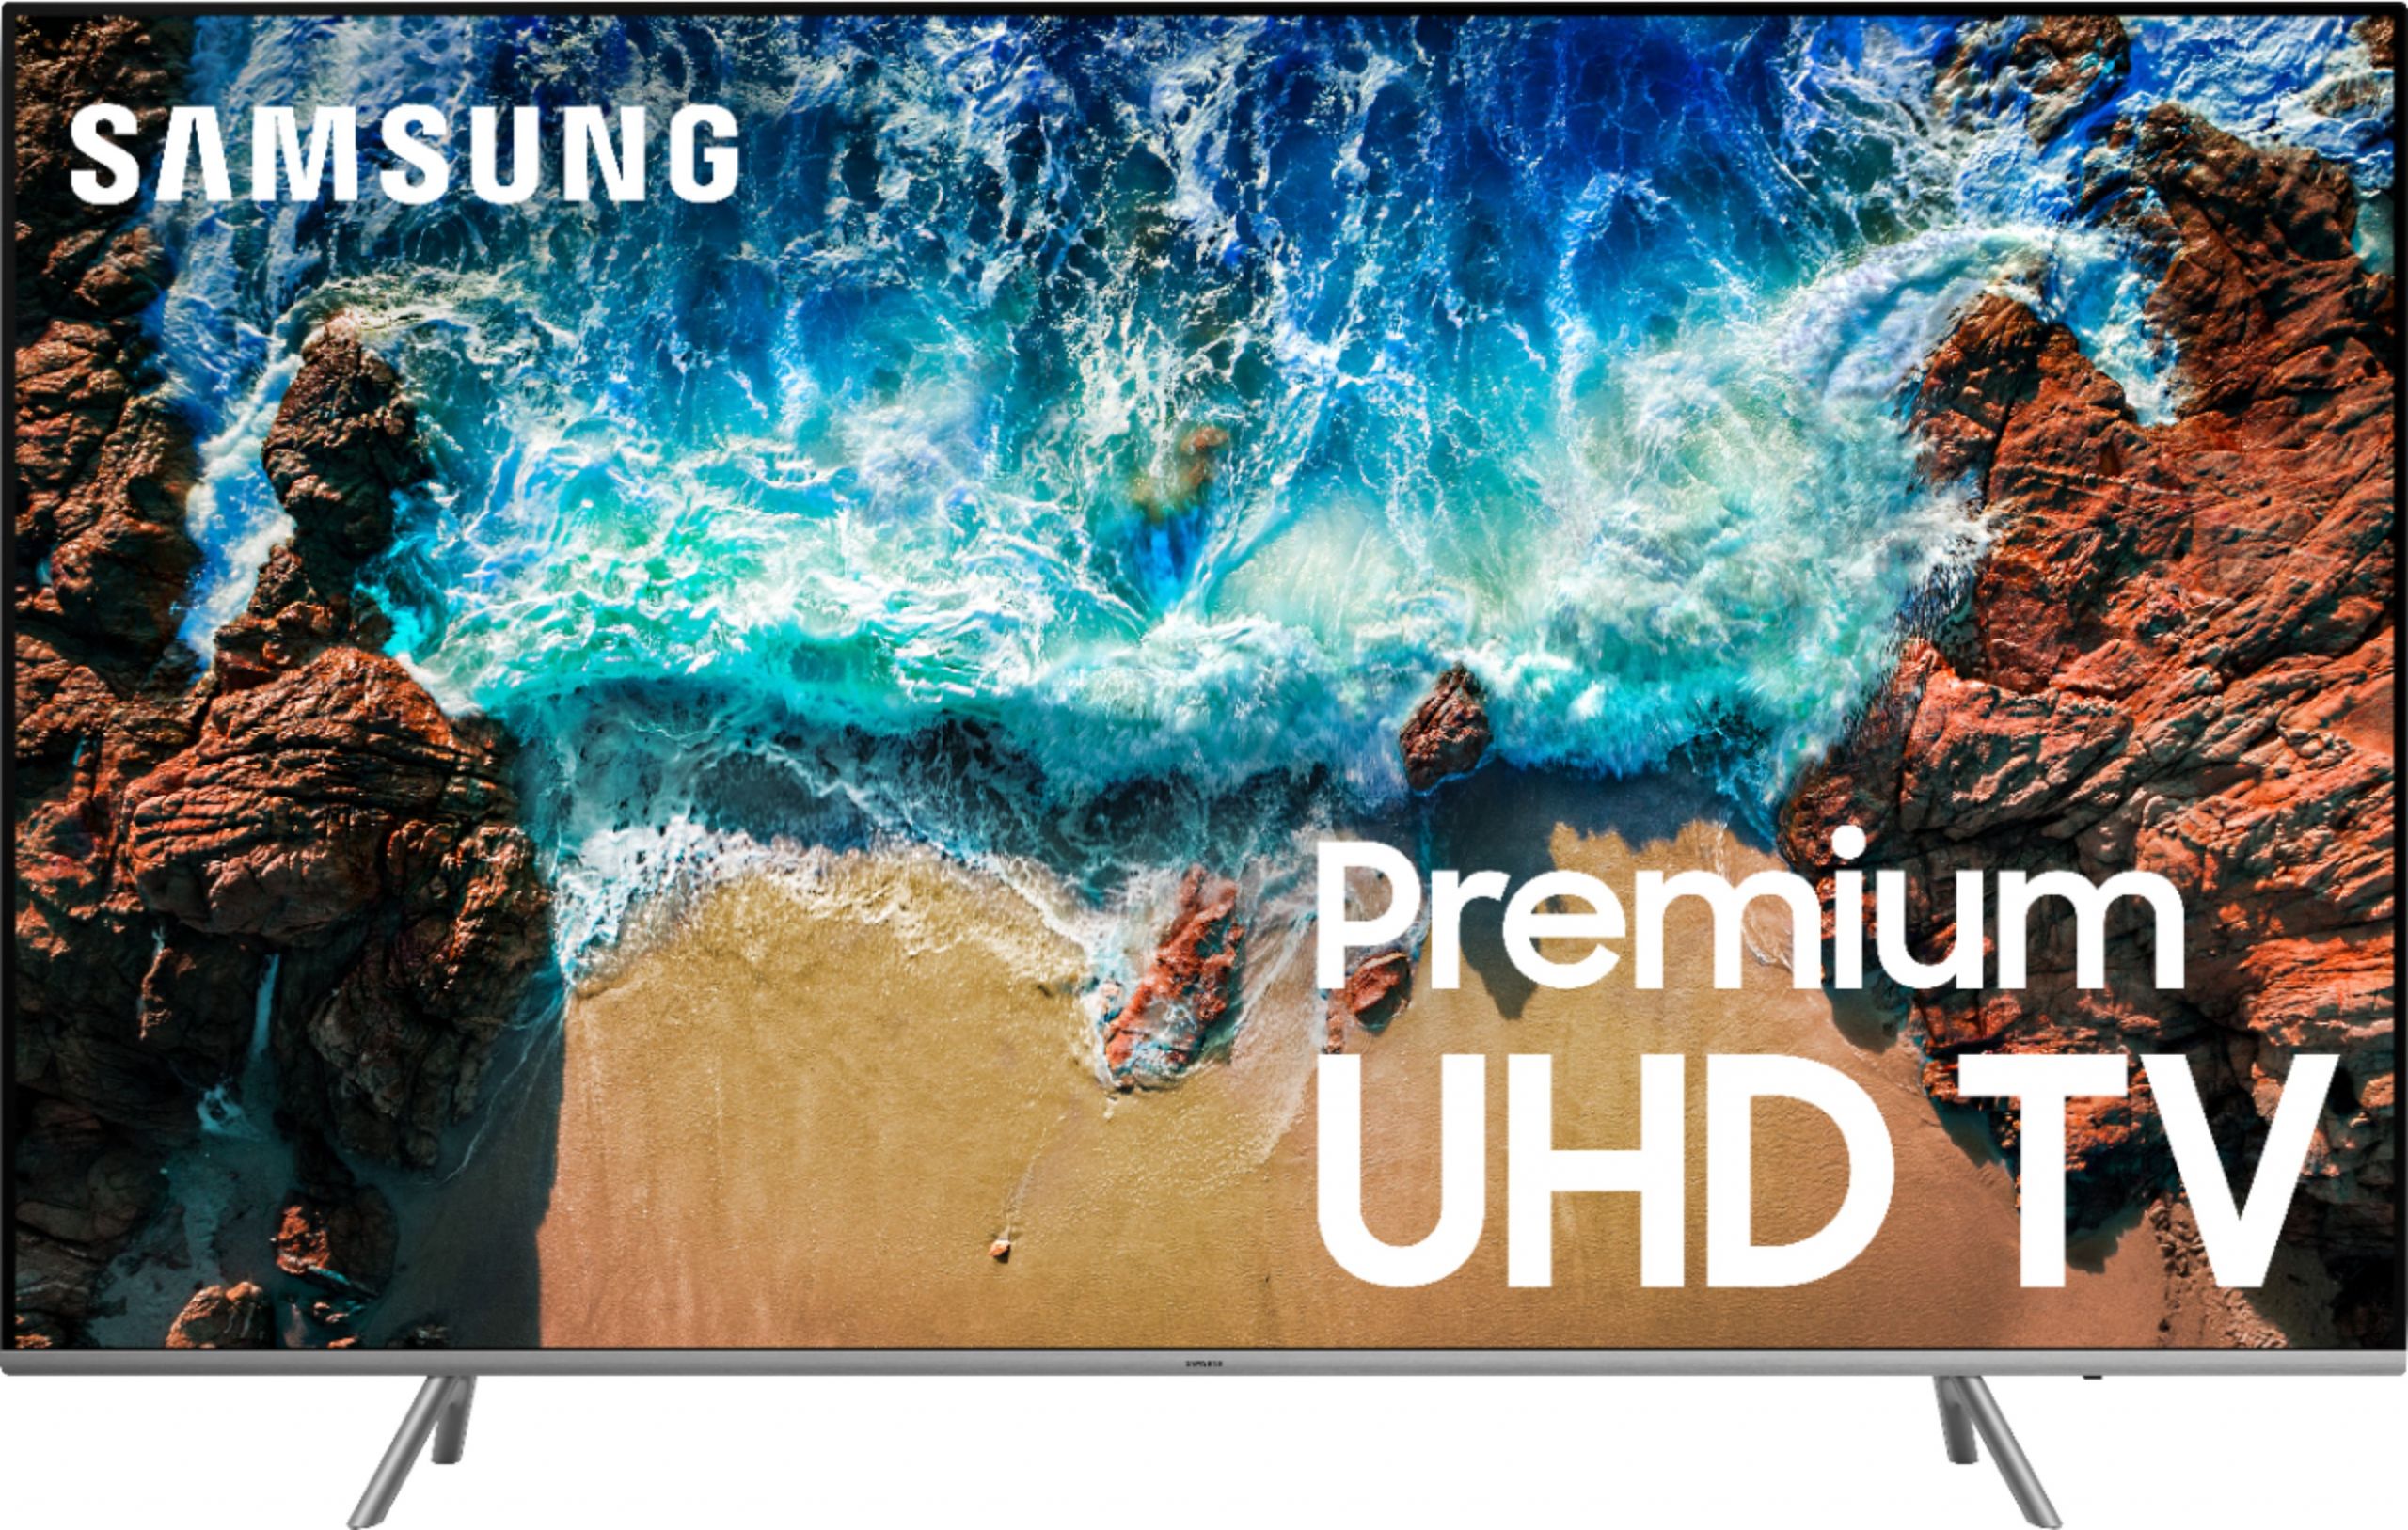 65 Inch Tv Over Fireplace Beautiful Samsung 82" Class Led Nu8000 Series 2160p Smart 4k Uhd Tv with Hdr